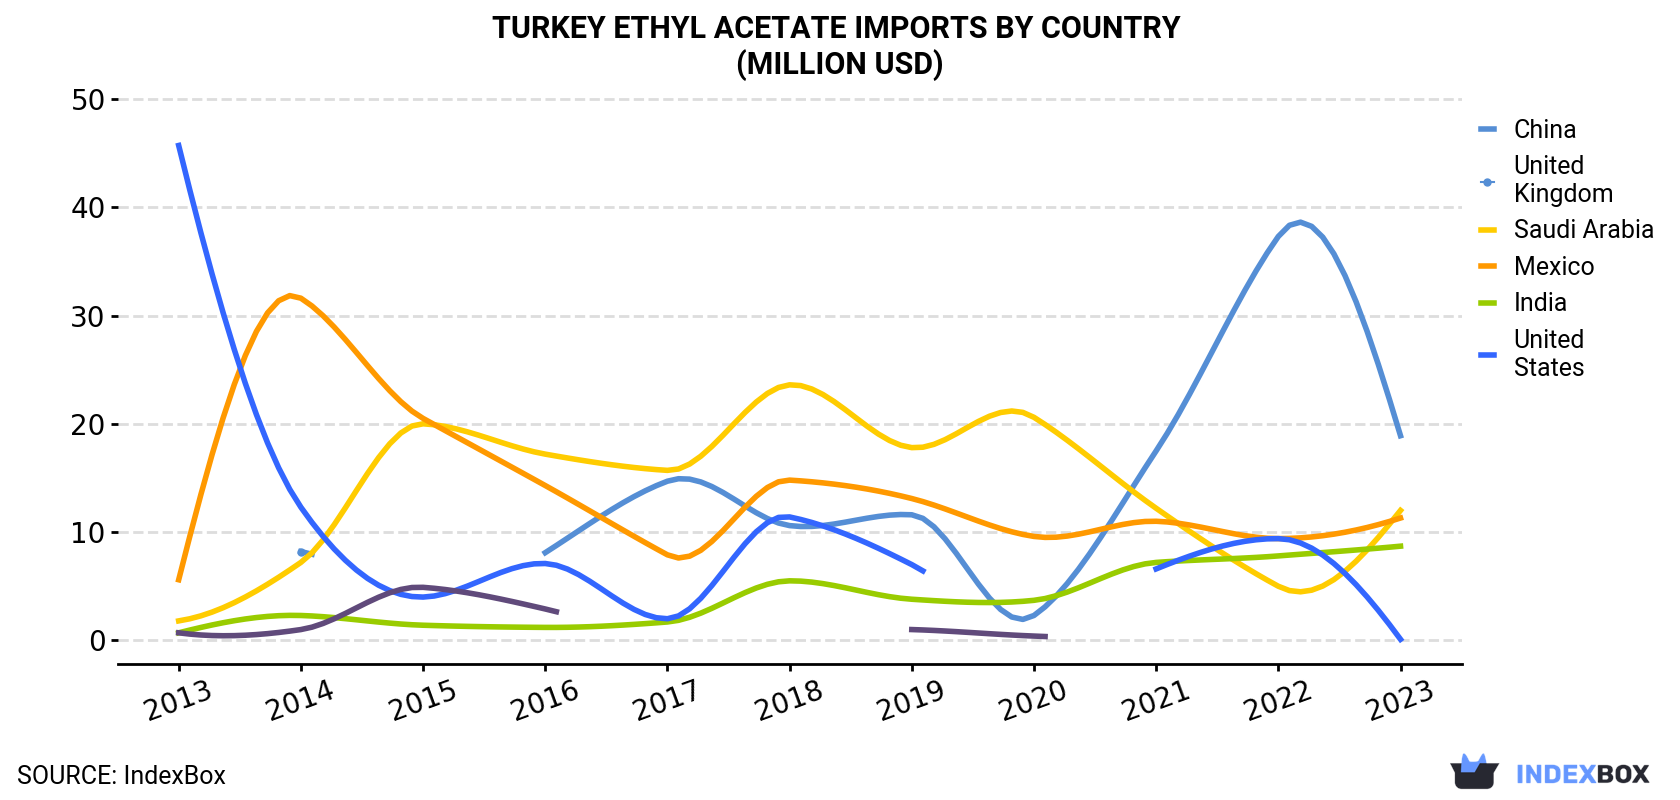 Turkey Ethyl Acetate Imports By Country (Million USD)